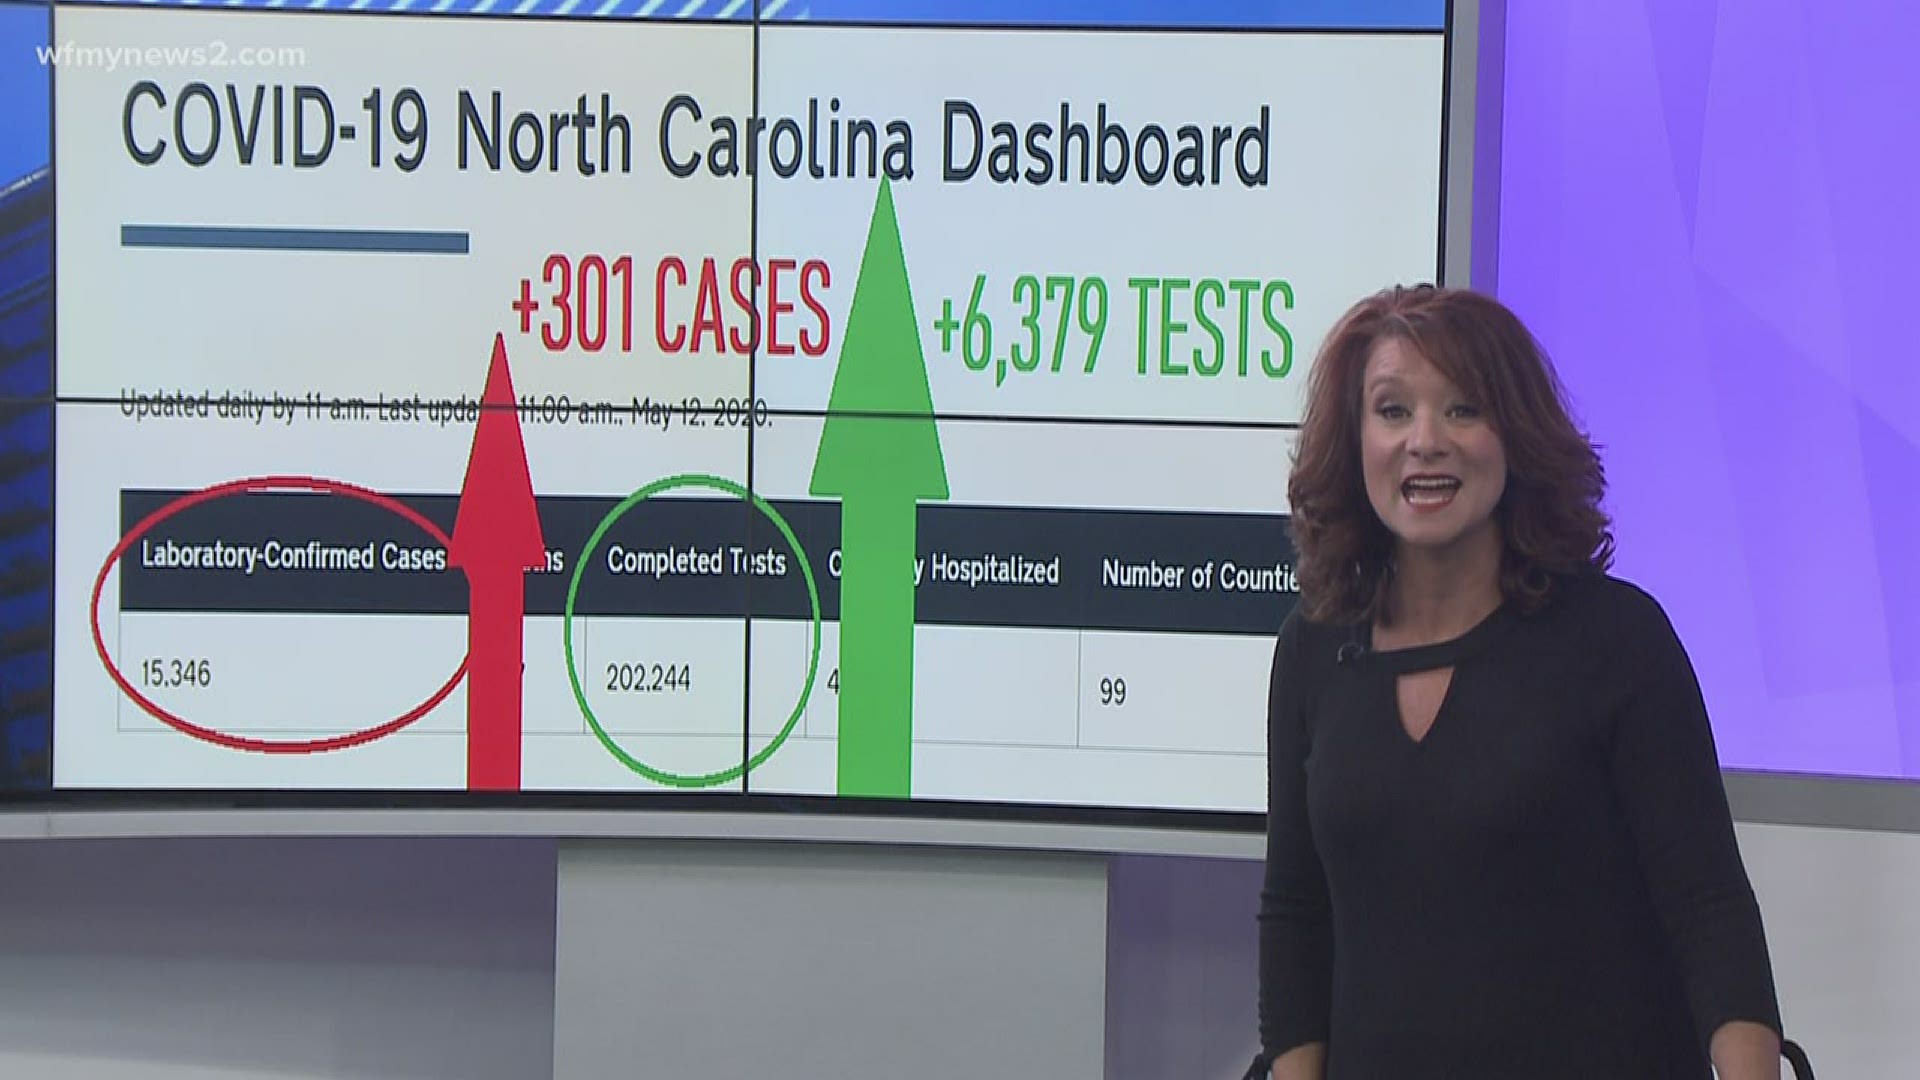 Here is a closer look at the numbers behind the coronavirus pandemic in North Carolina